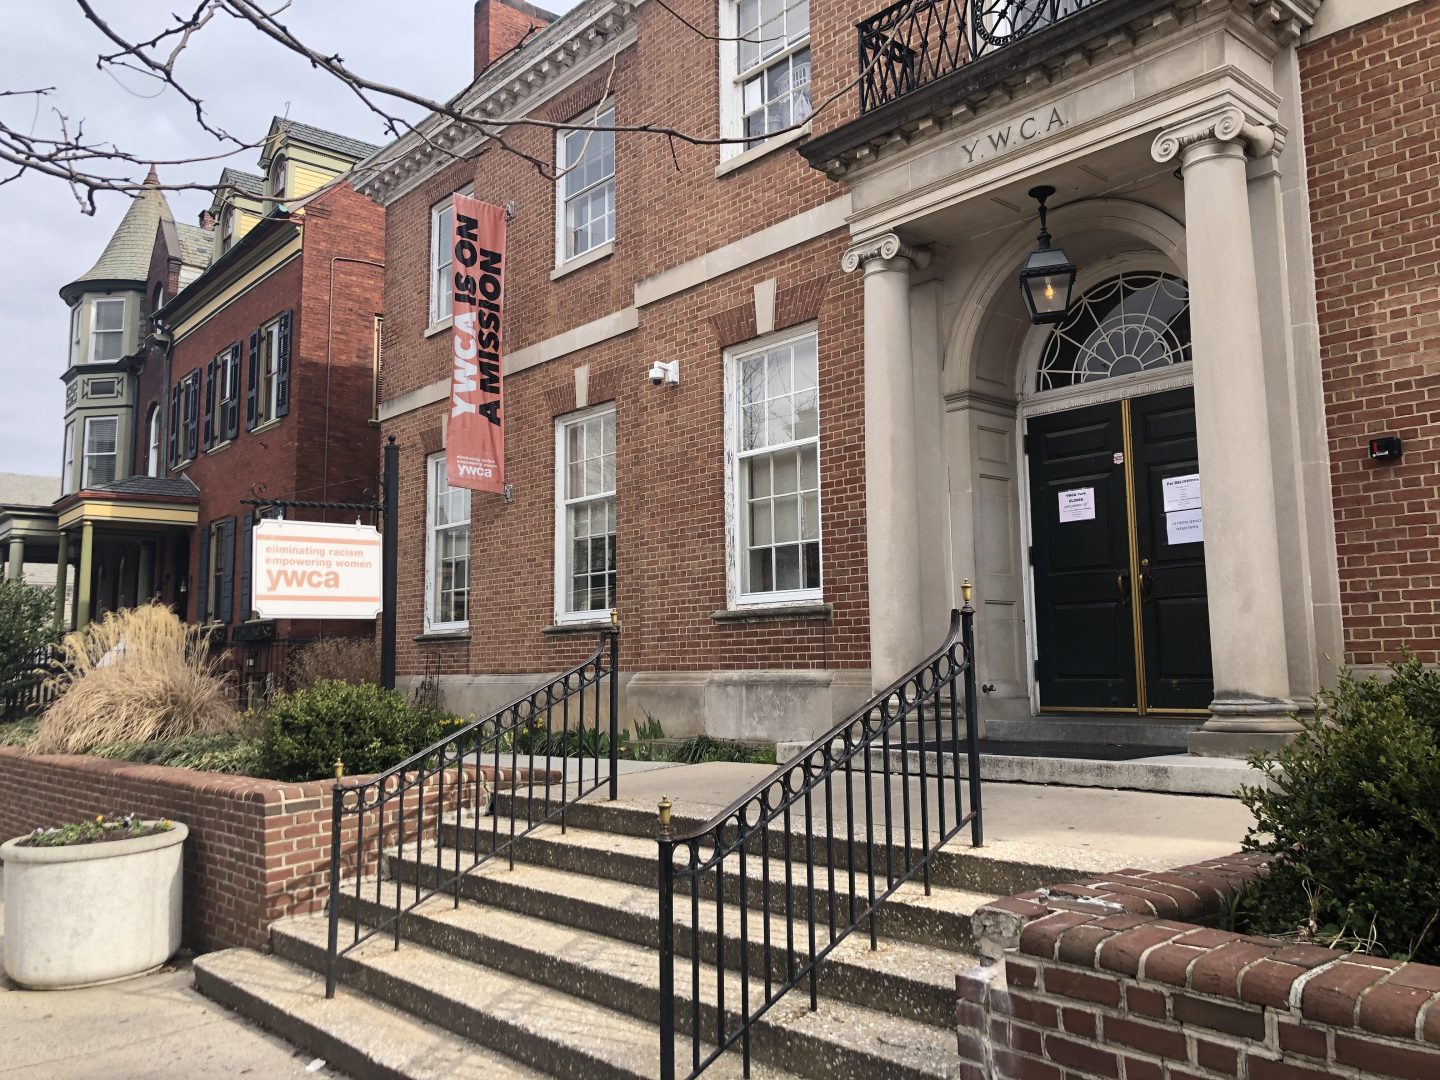 The YWCA York closed its child care center operations and has not applied for a waiver from the state.